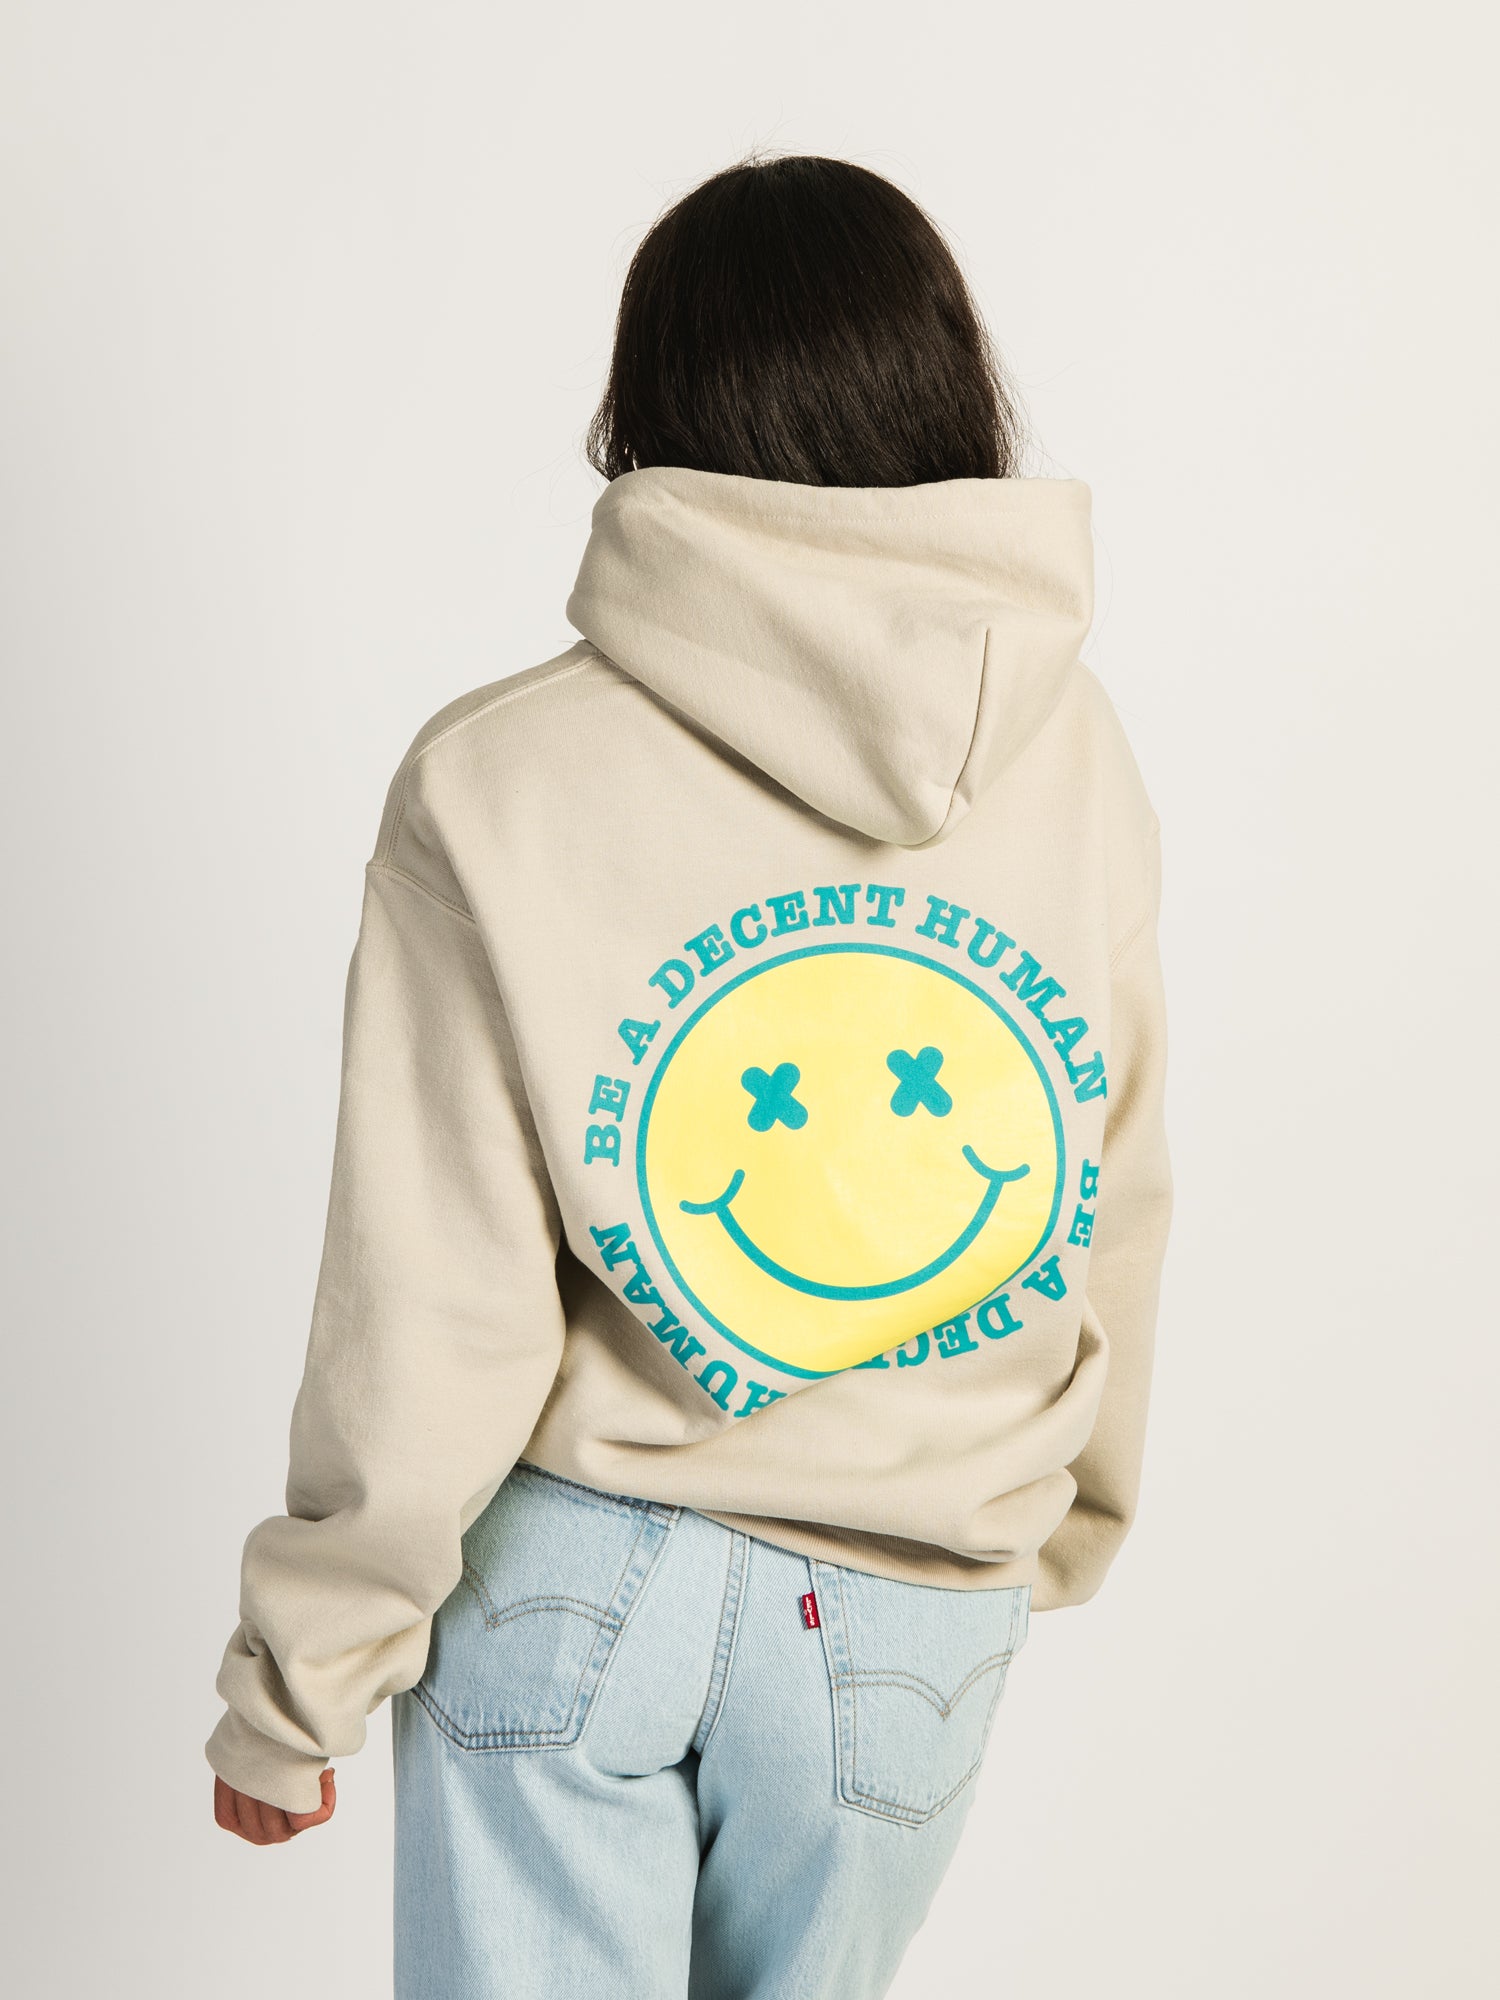 Womens Hoodies & Sweaters - The Best Selection in Canada - Shop Now